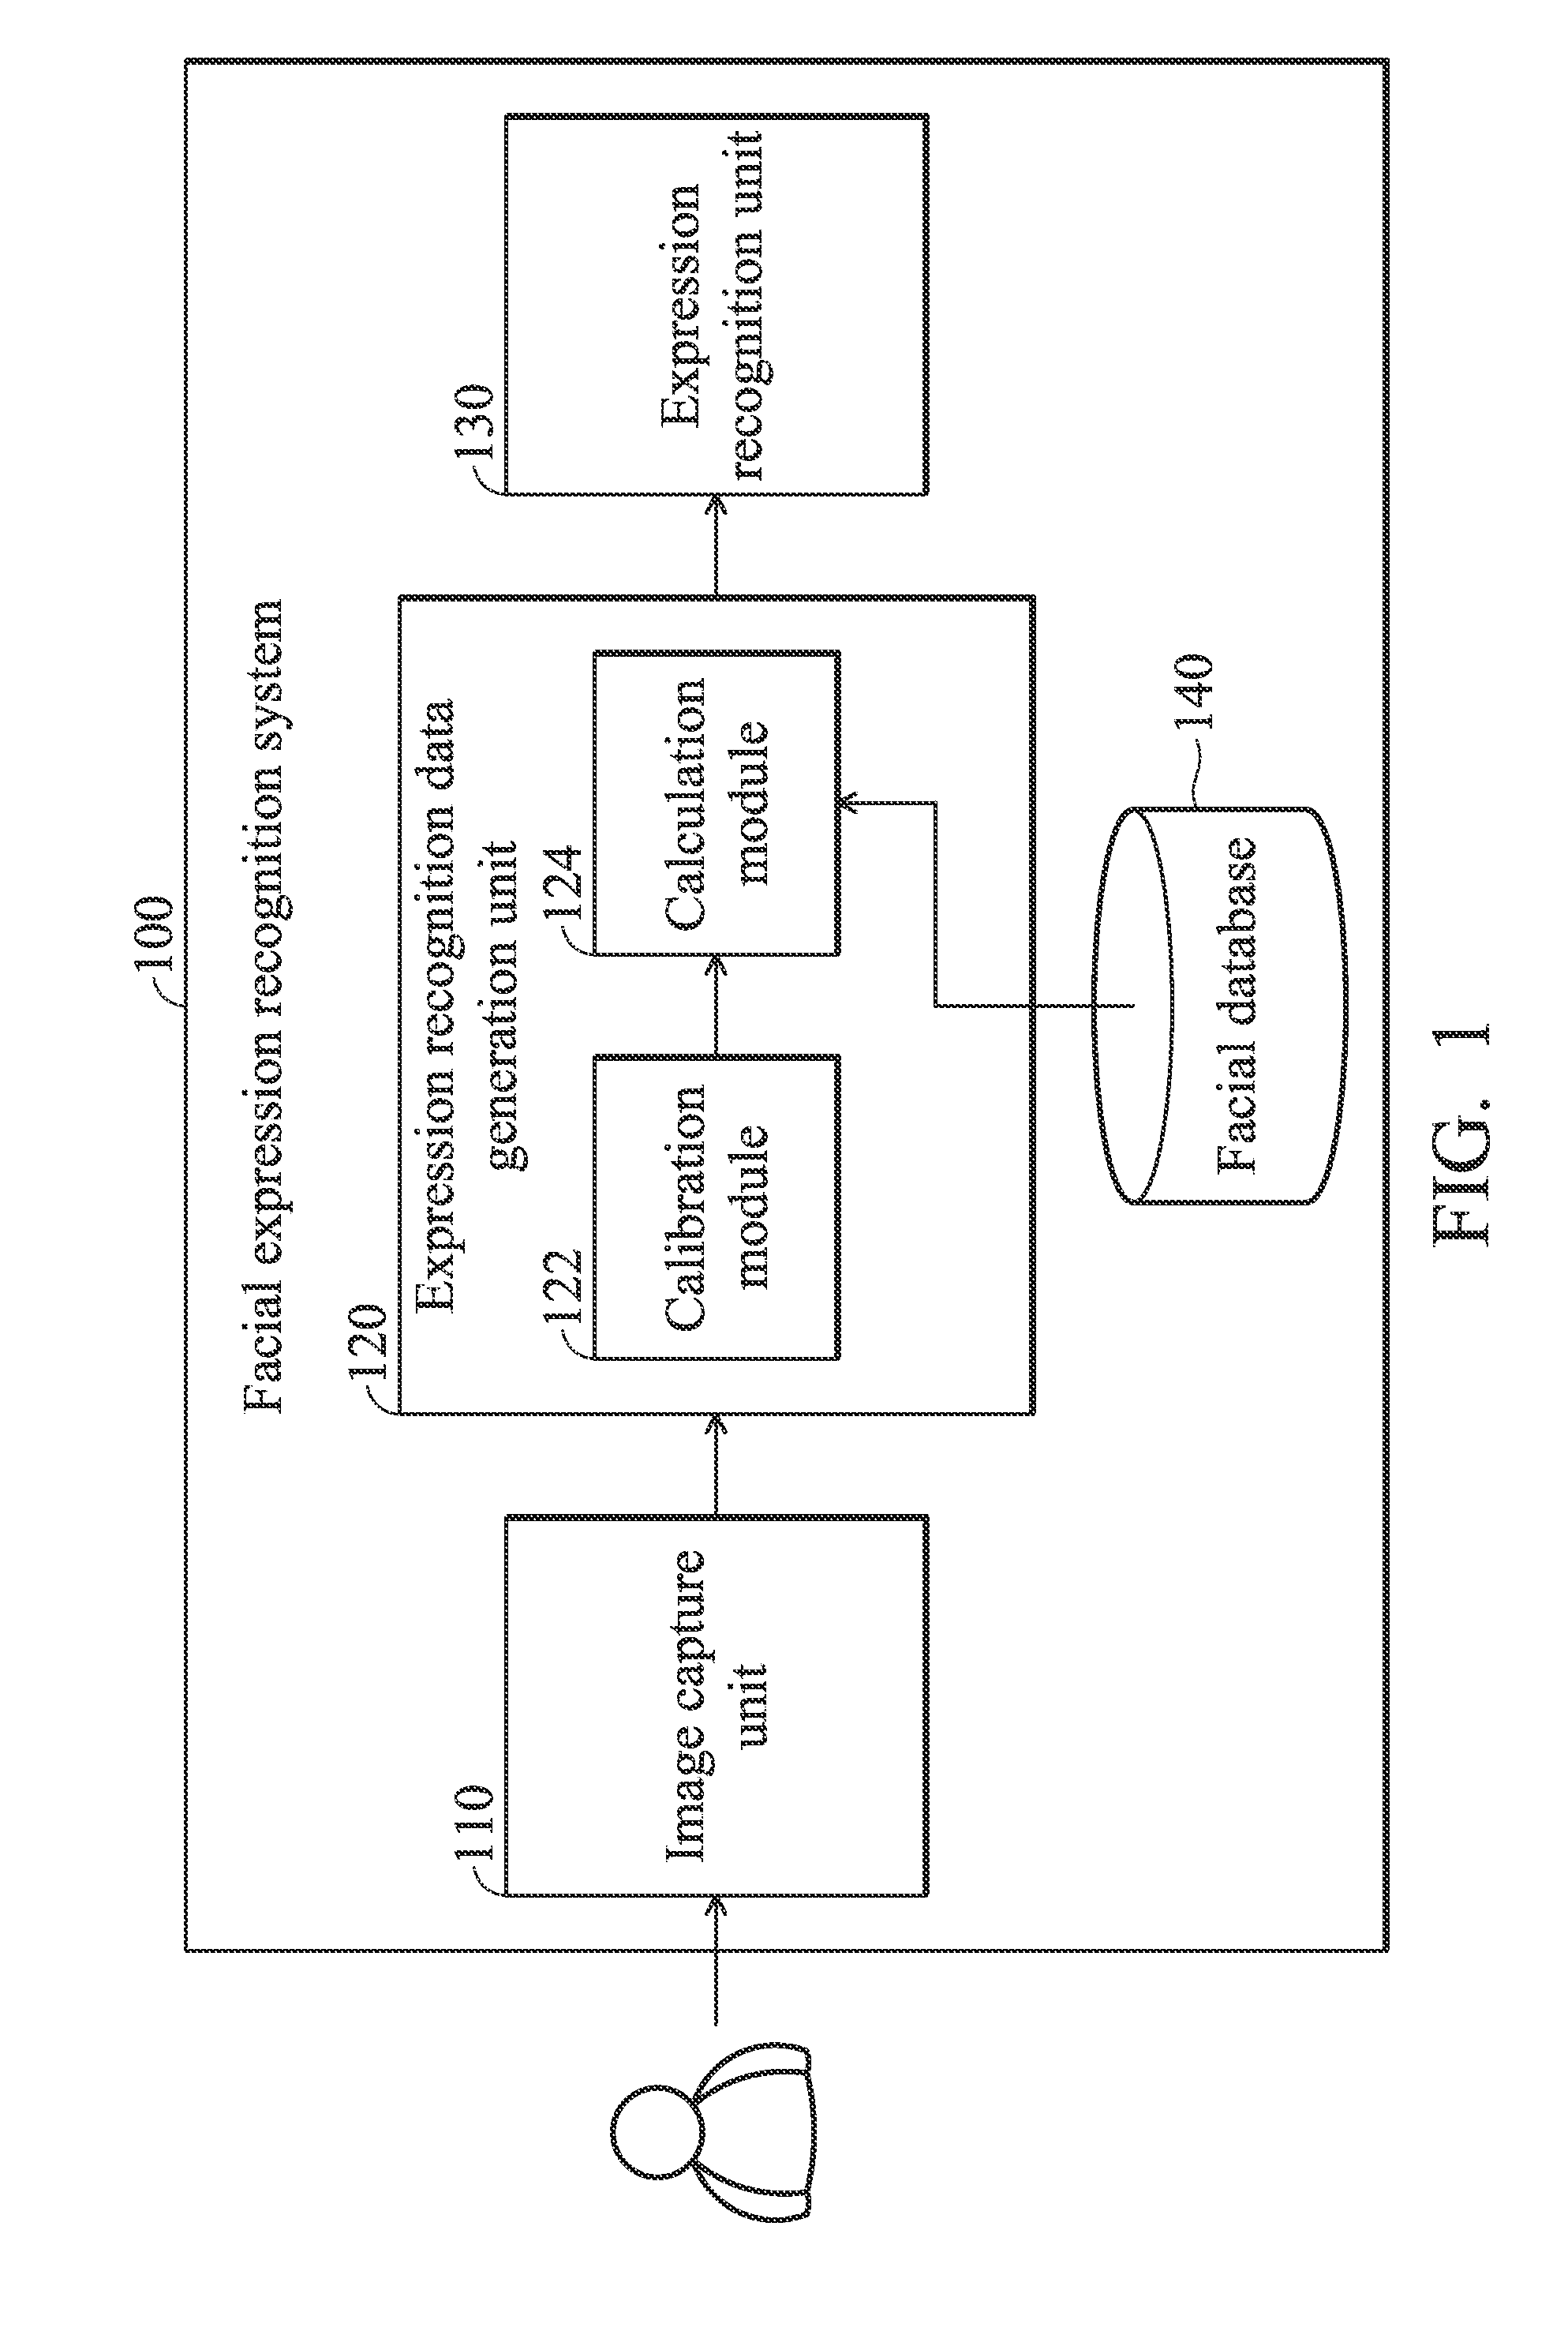 Facial Expression Recognition Systems and Methods and Computer Program Products Thereof